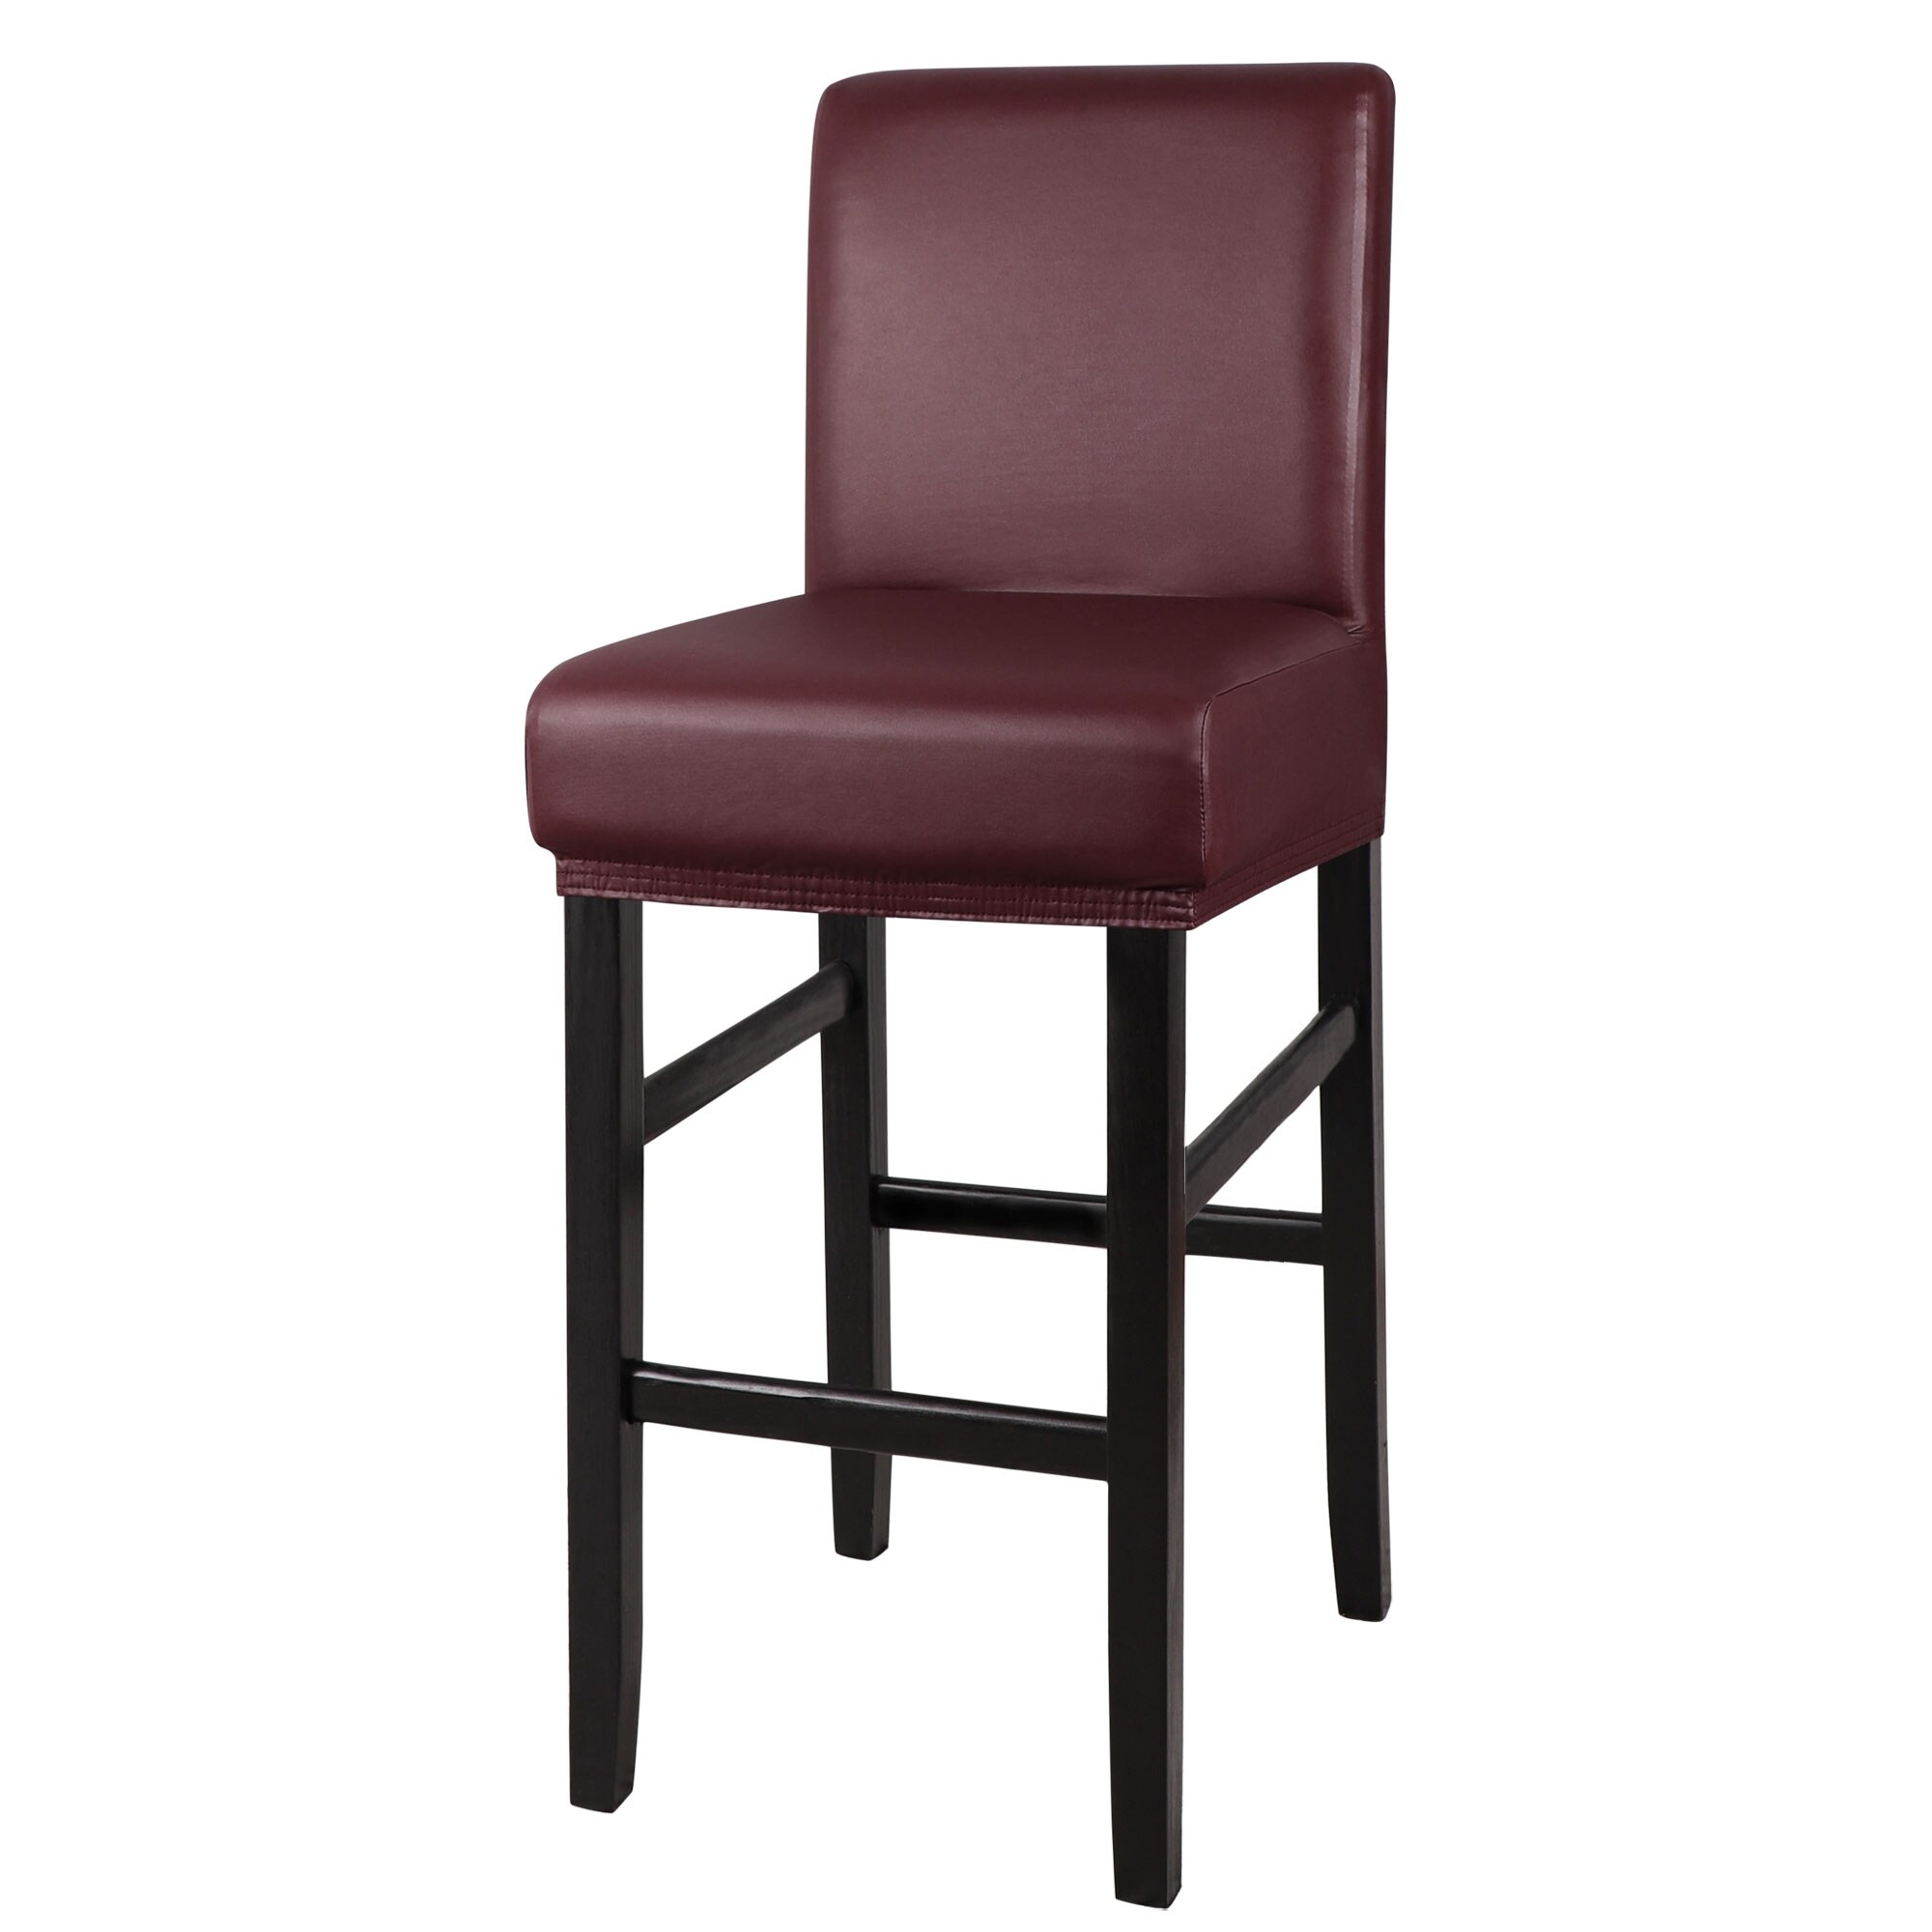 Waterproof Bar Stool Covers for Counter Short Back Chair Covers